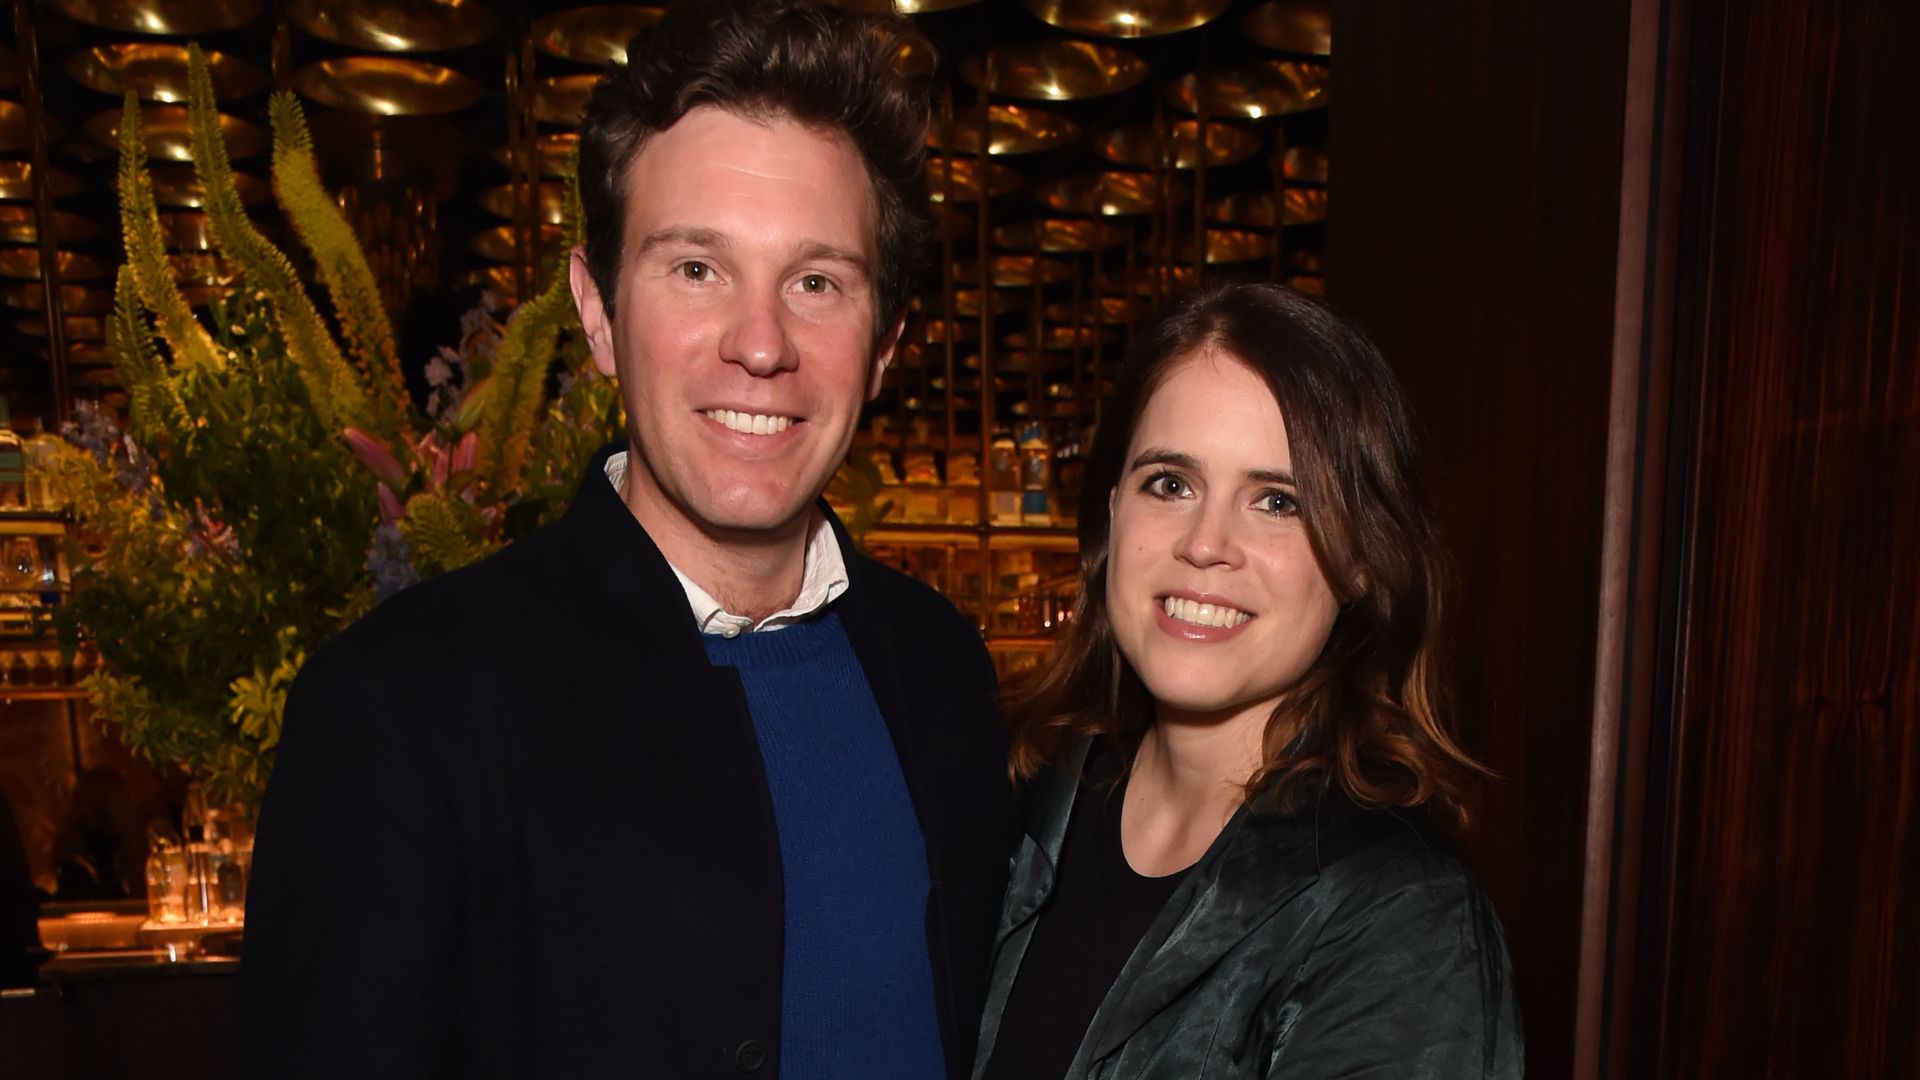 Jack and Eugenie smiling at book launch in 2021